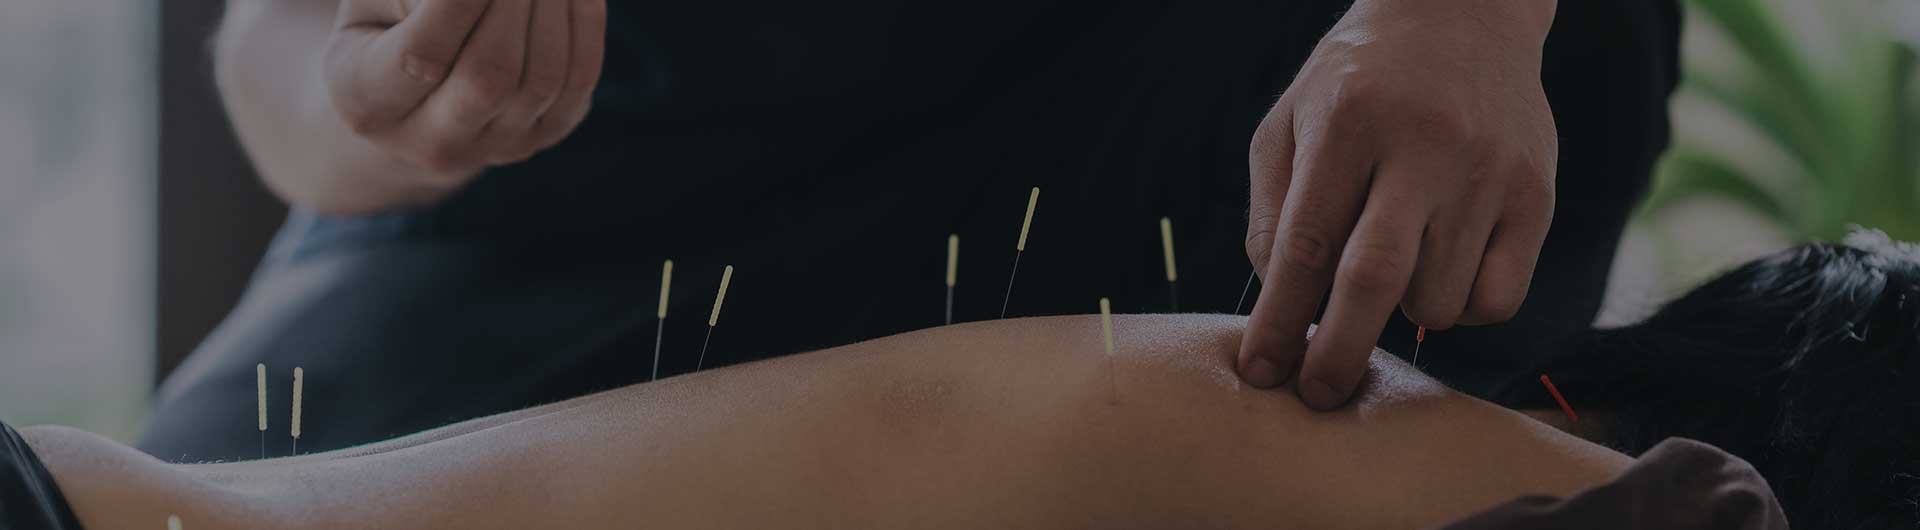 Therapist giving acupuncture treatment to a woman.